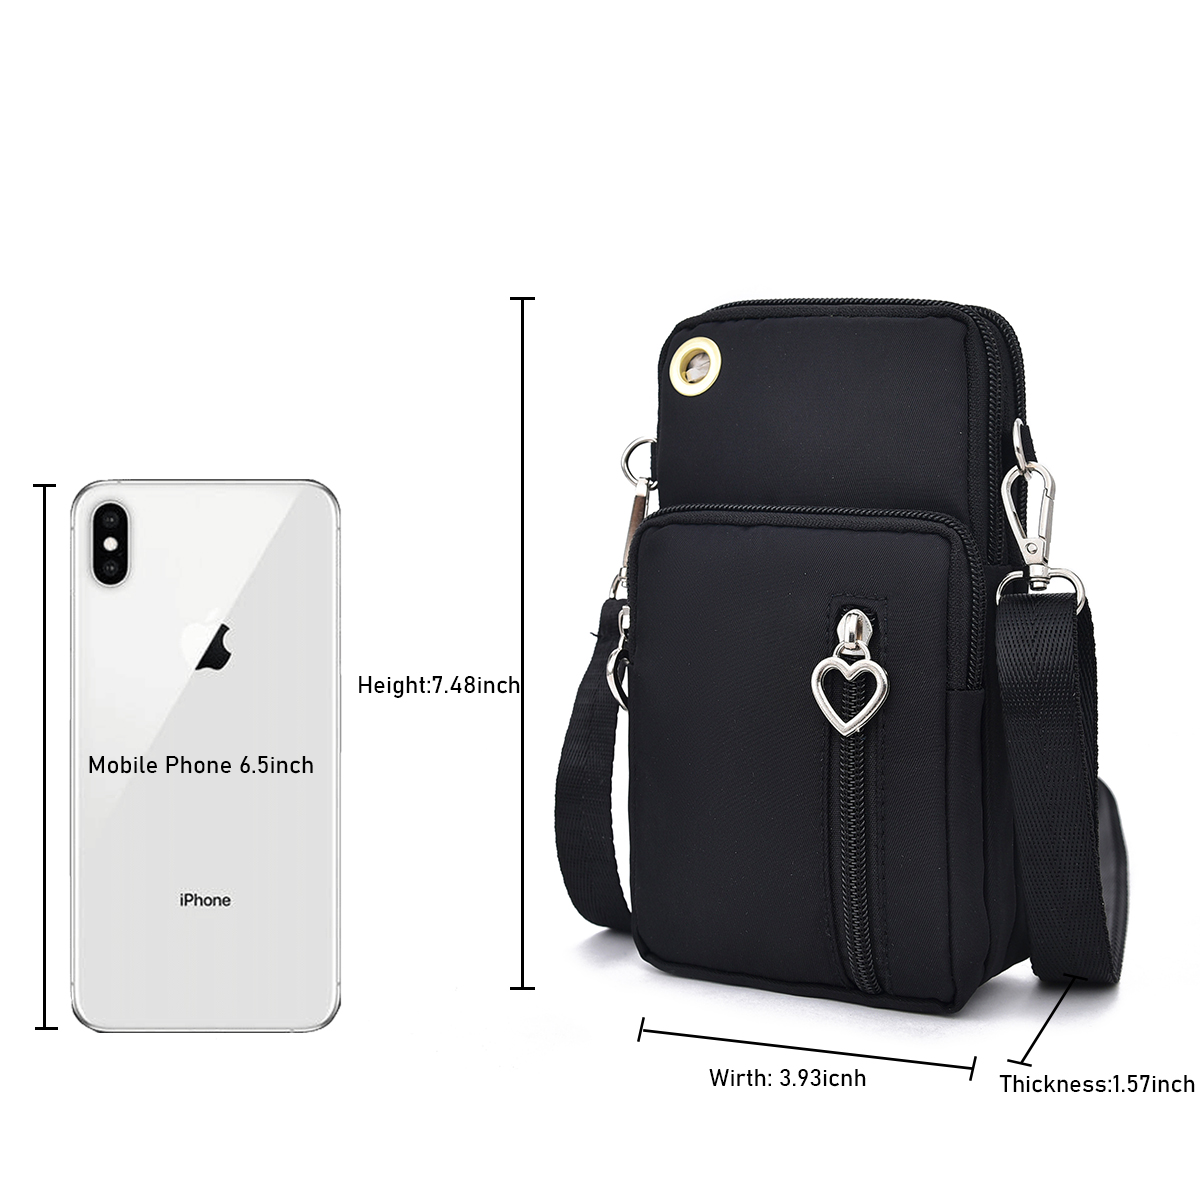 S57f278e1785f47d08b84e8d47a4693581 Universal Mobile Phone Bag For Samsung/iPhone/Huawei/HTC/LG Arm Shoulder Phone Pouch